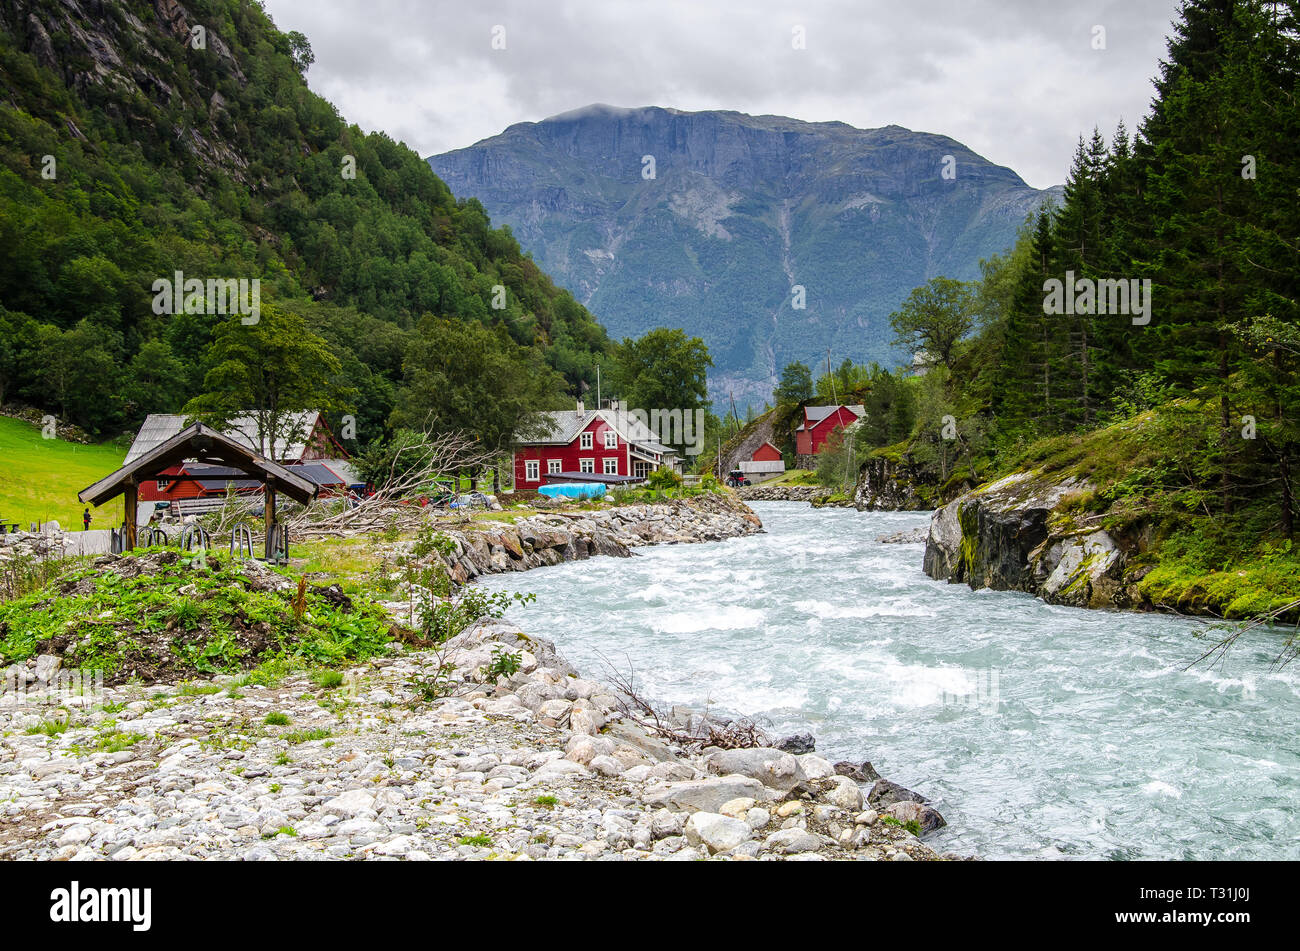 View of a small village with red houses and glacier river in Buarbreen valley in Odda region, Norway. Stock Photo